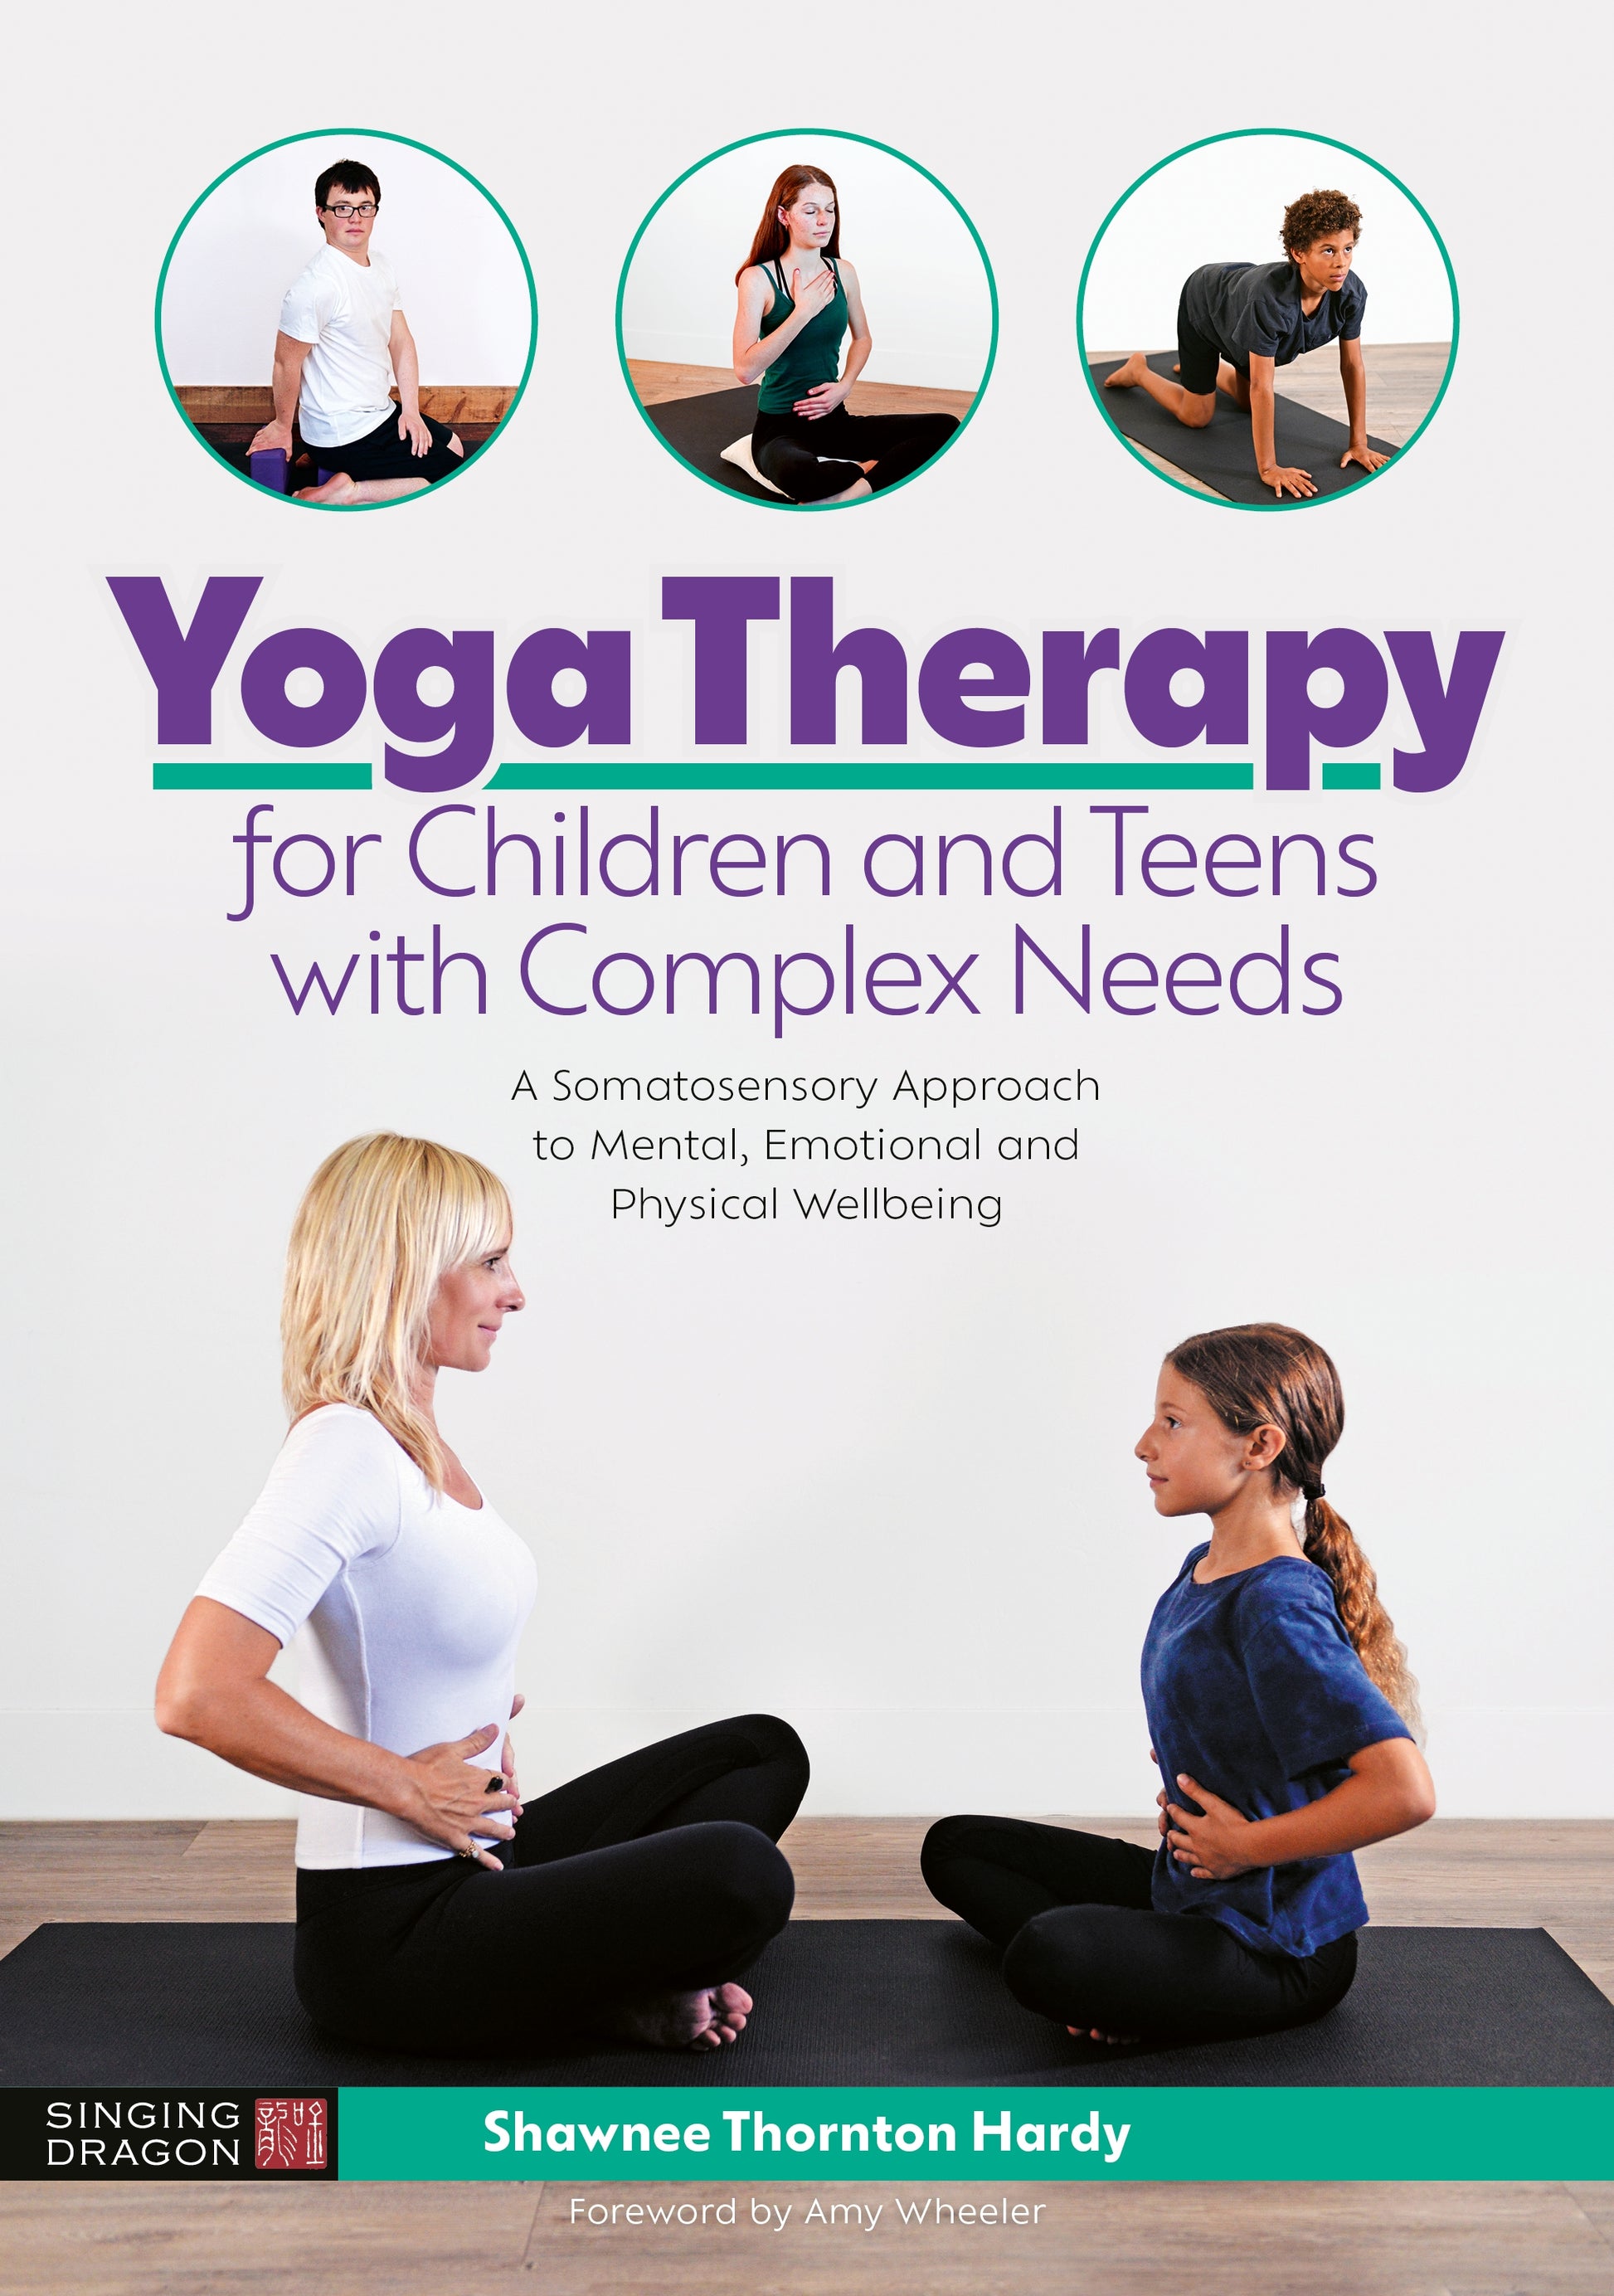 Yoga Therapy for Children and Teens with Complex Needs by Amy Wheeler, Shawnee Thornton Thornton Hardy